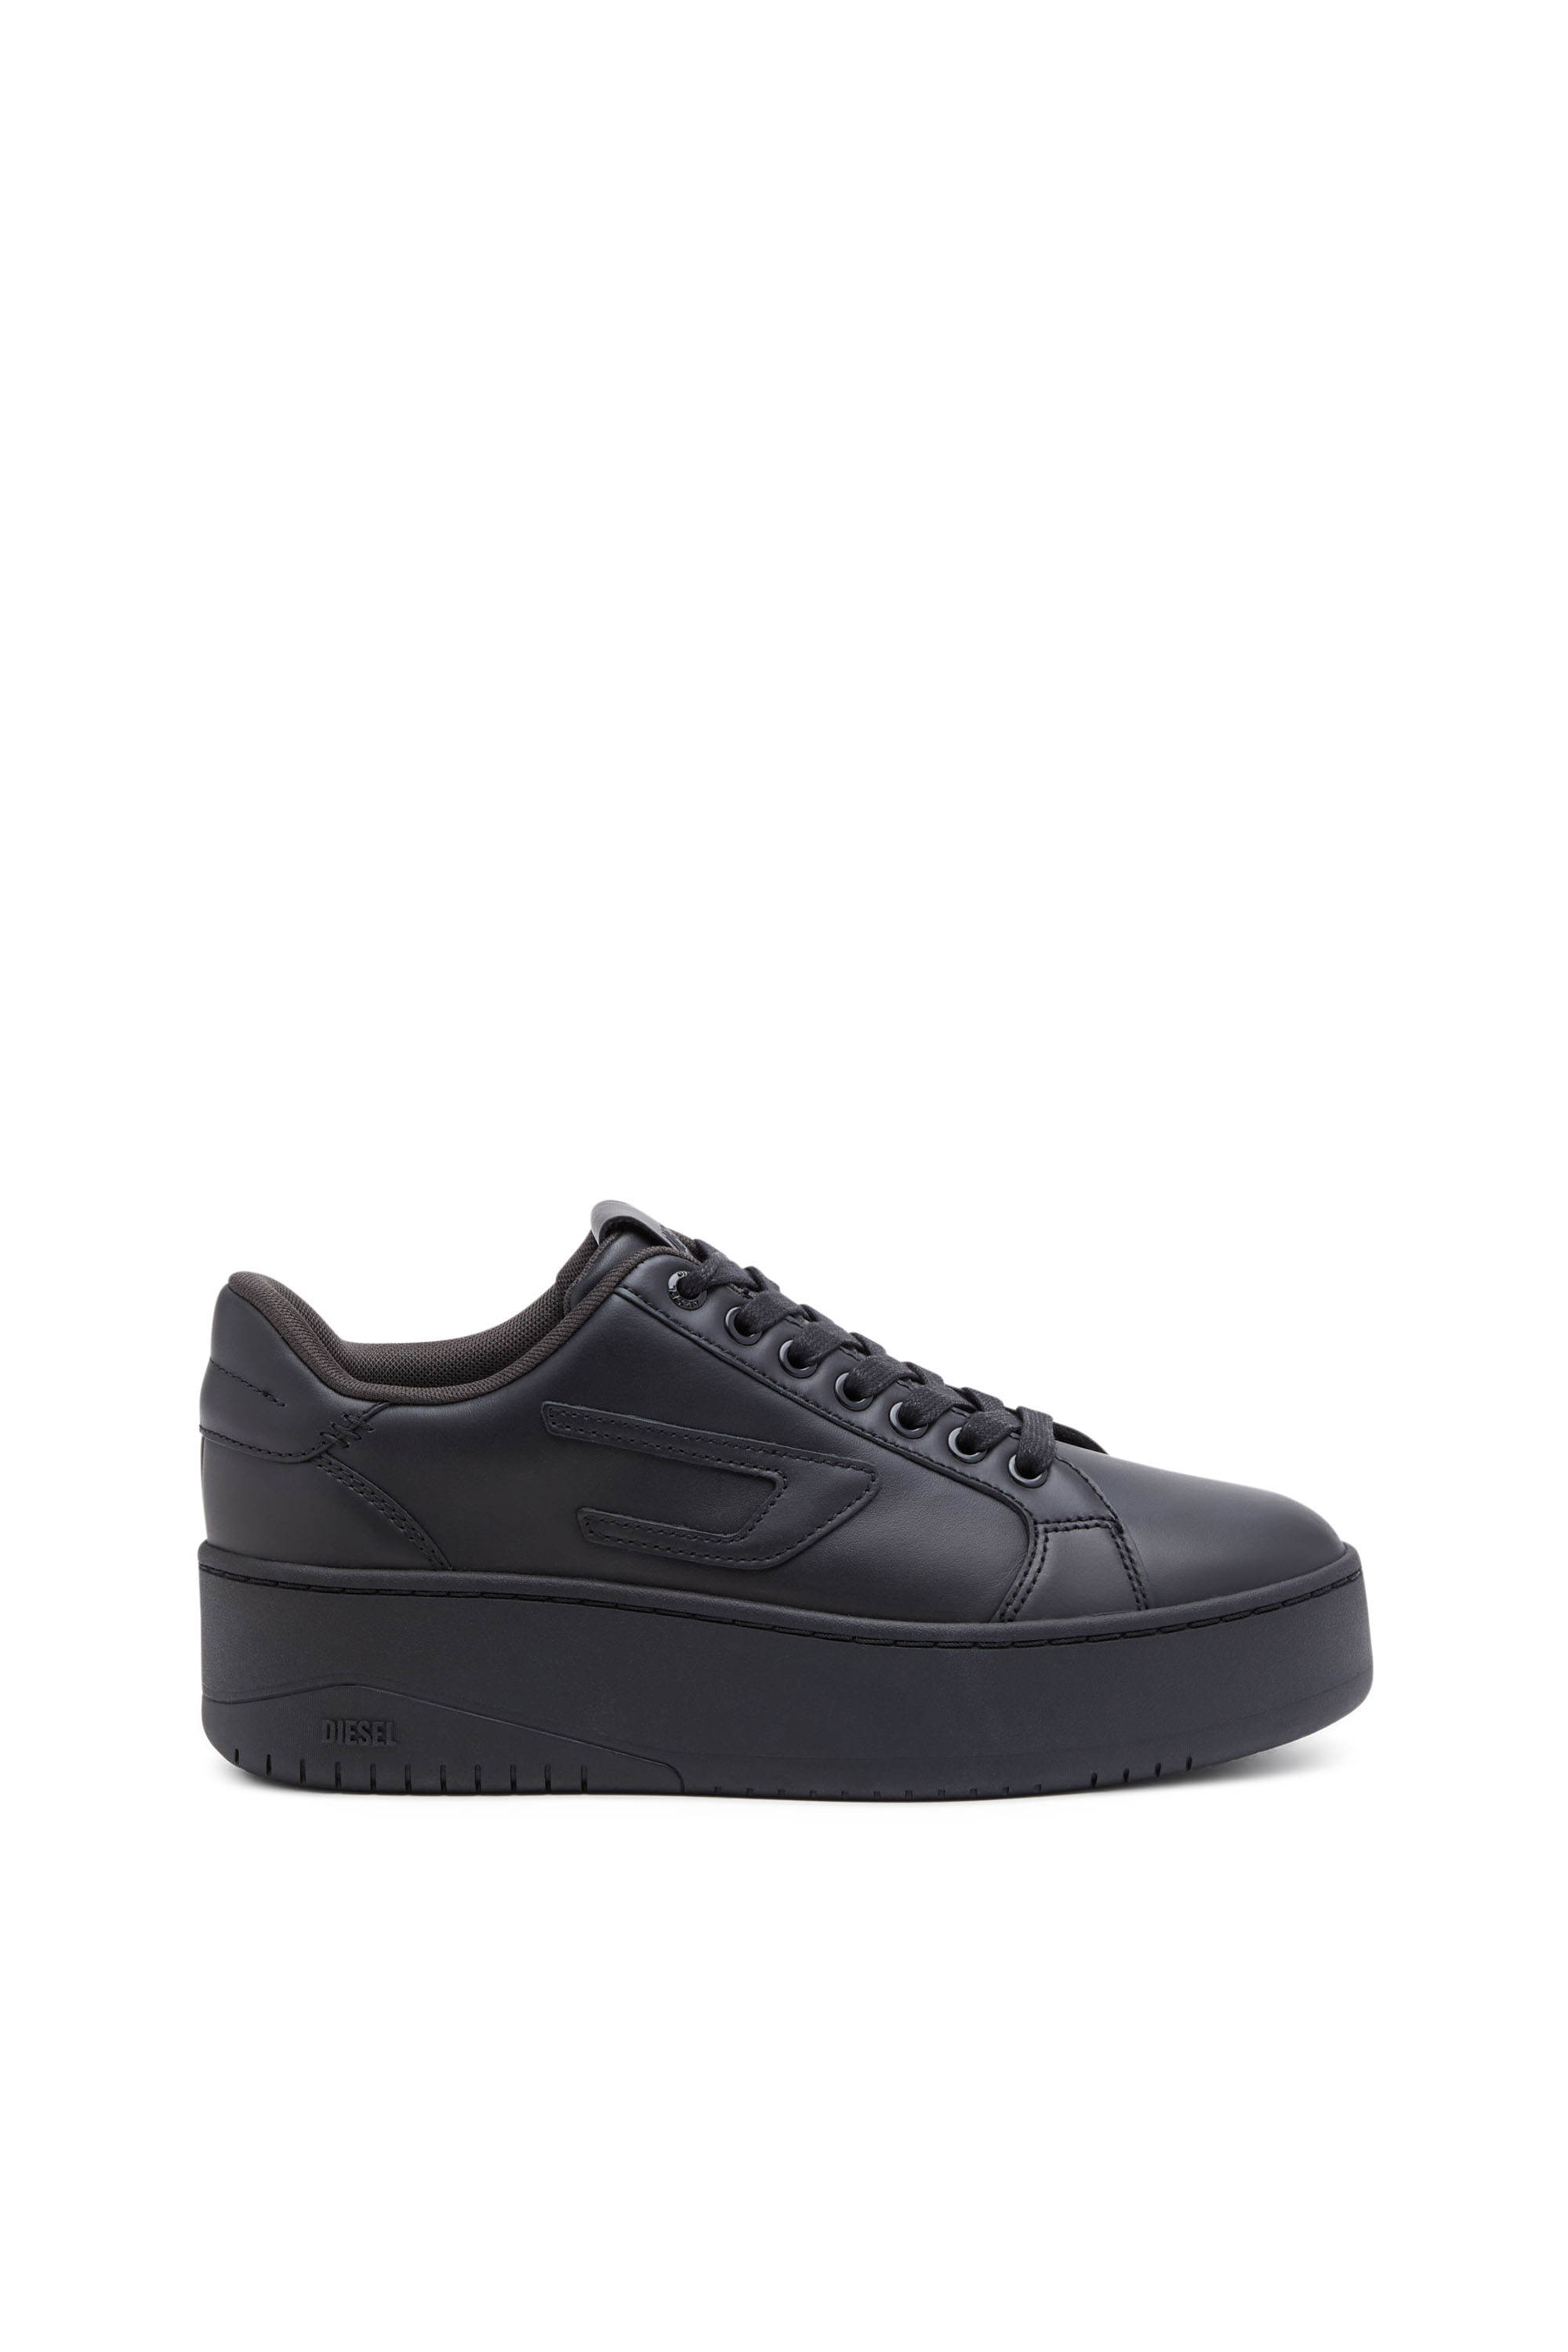 Diesel - S-ATHENE BOLD X, Female S-Athene Bold-Flatform sneakers in leather in Black - Image 1